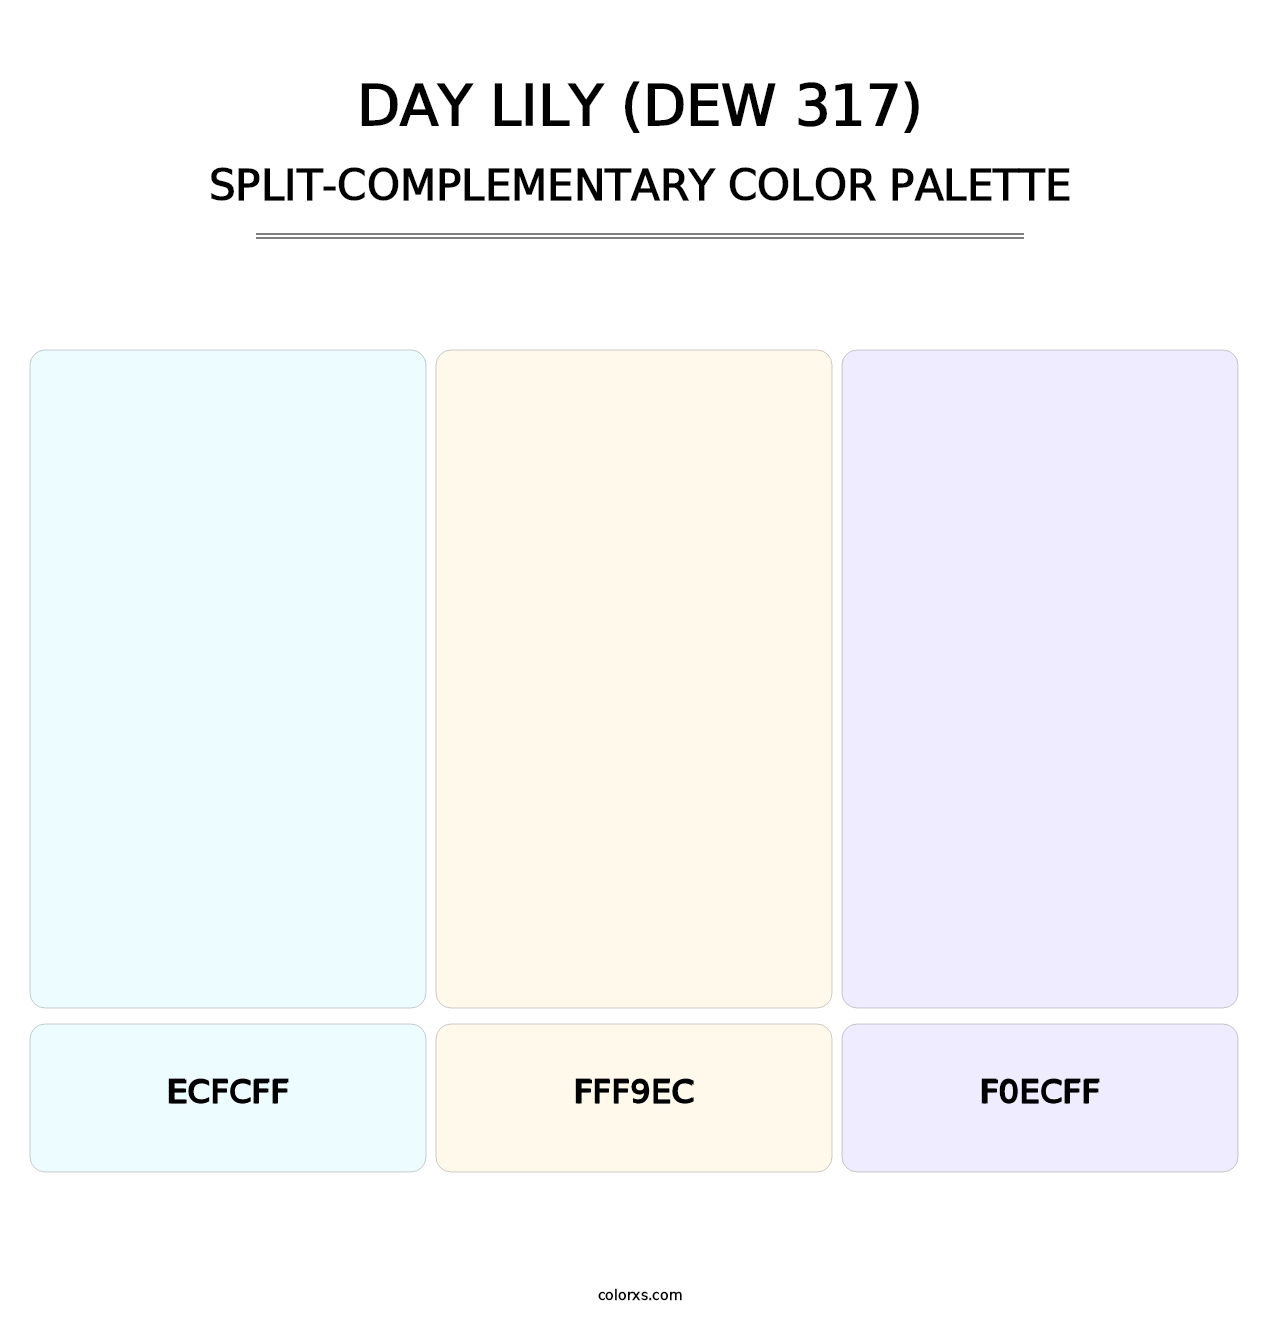 Day Lily (DEW 317) - Split-Complementary Color Palette